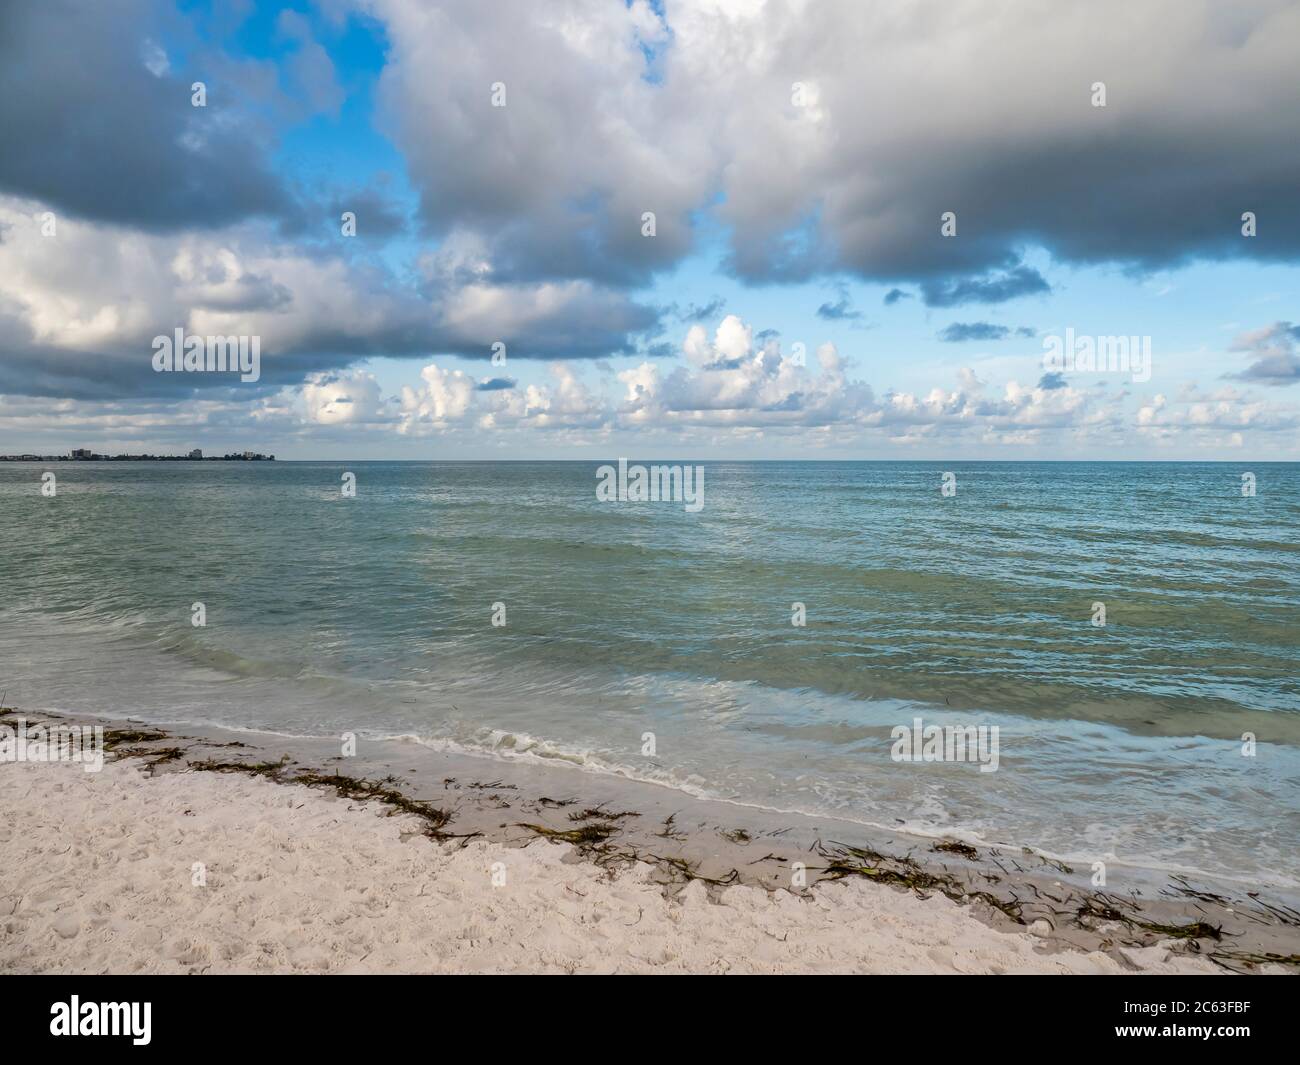 Gulf of Mexico Lido Beach on Lido Key In Sarasota Florida in the United States Stock Photo